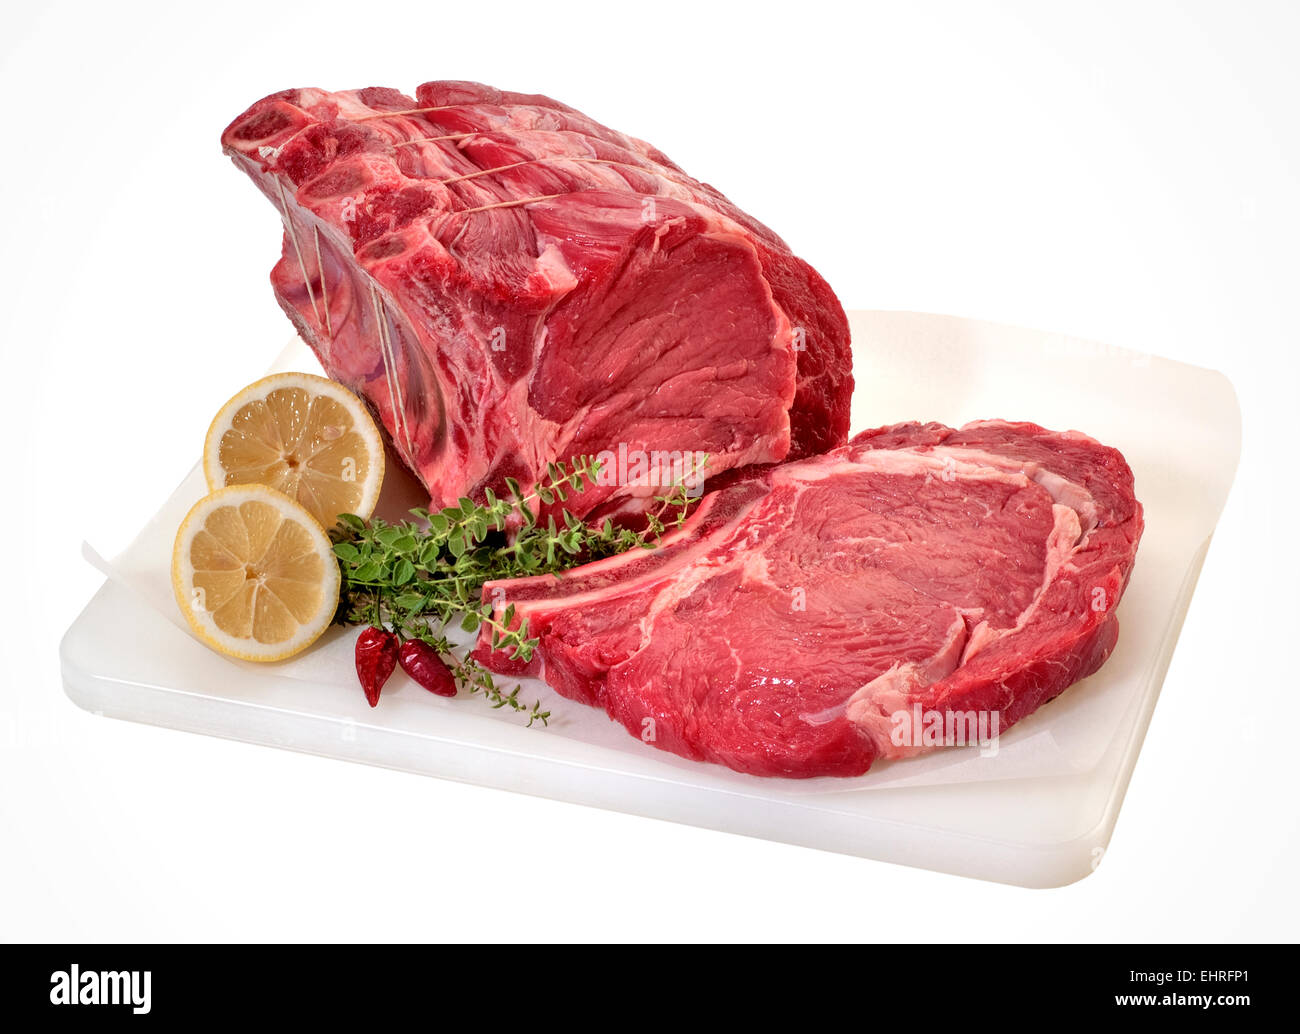 Prime rib beef(+clipping path) Stock Photo